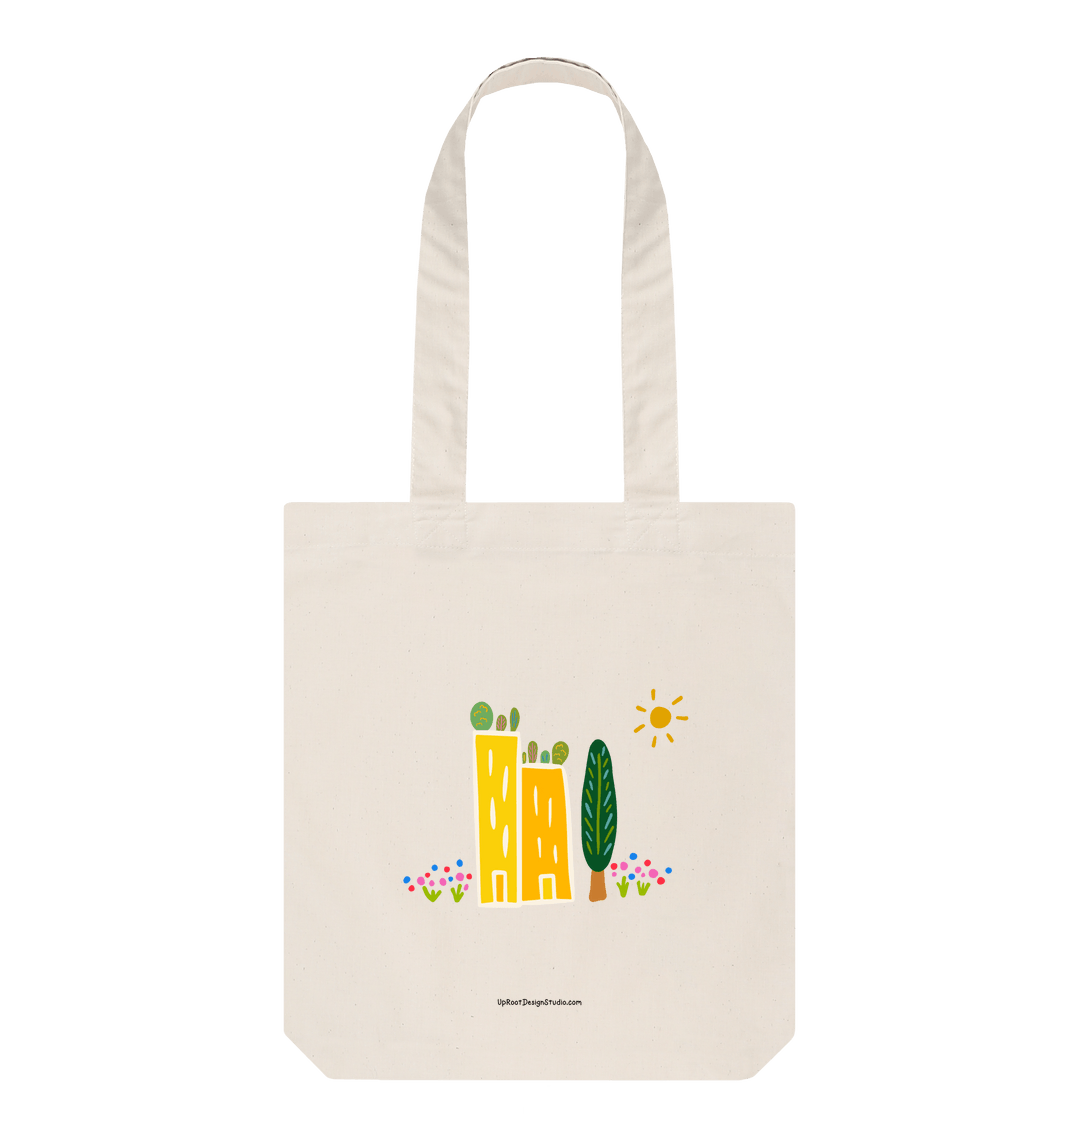 "Flavor Party" Growing Gift Box: Herb Garden Kit, Soy Candle (Sandalwood + Vanilla), Green Cities Tote, "Love What You Grow" Greeting Card, "Harvest Moon" Chai Tea, Mindfulness Journal (Grow & Bloom)